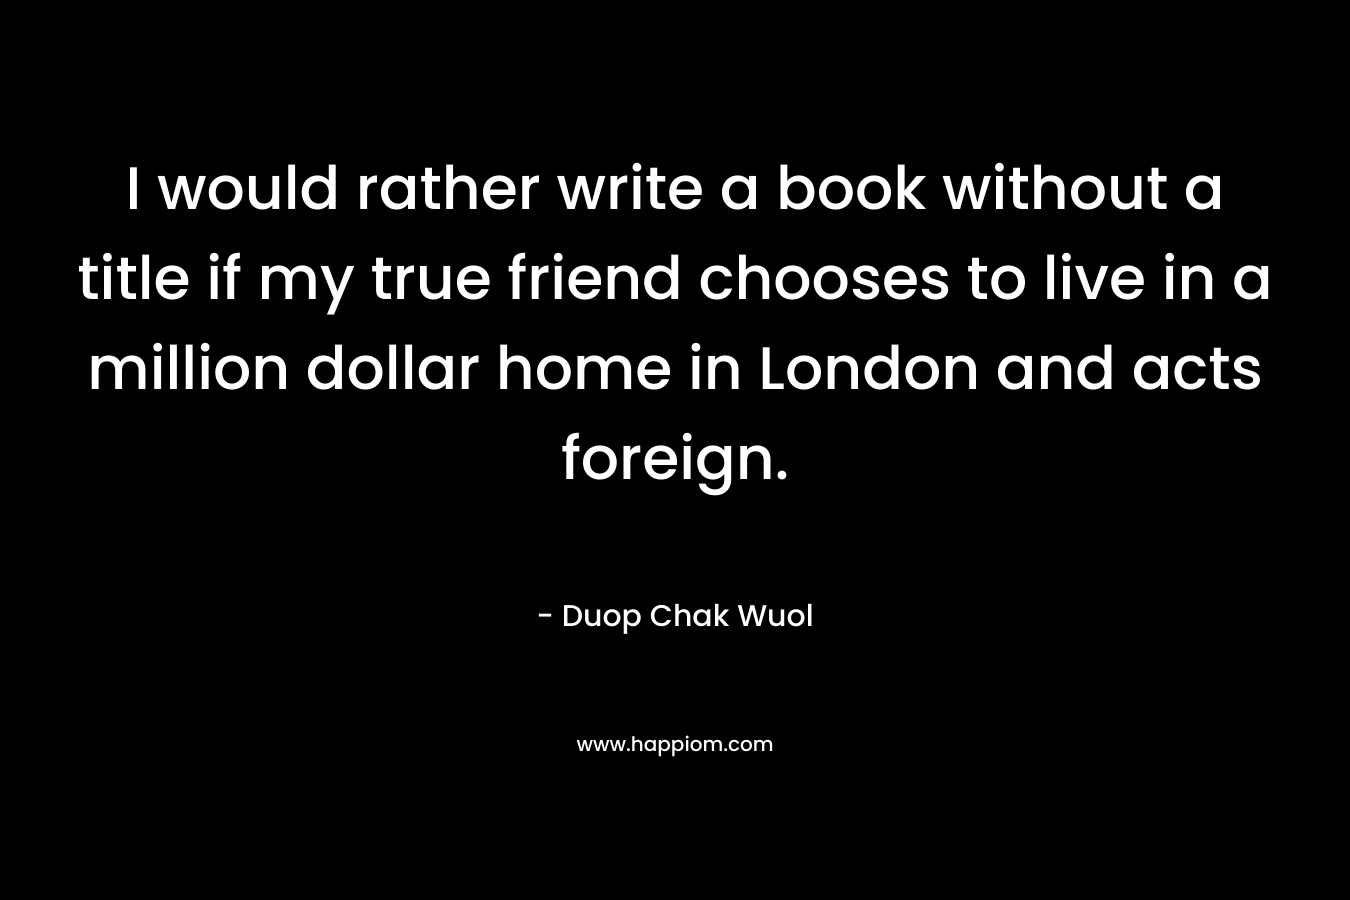 I would rather write a book without a title if my true friend chooses to live in a million dollar home in London and acts foreign. – Duop Chak Wuol